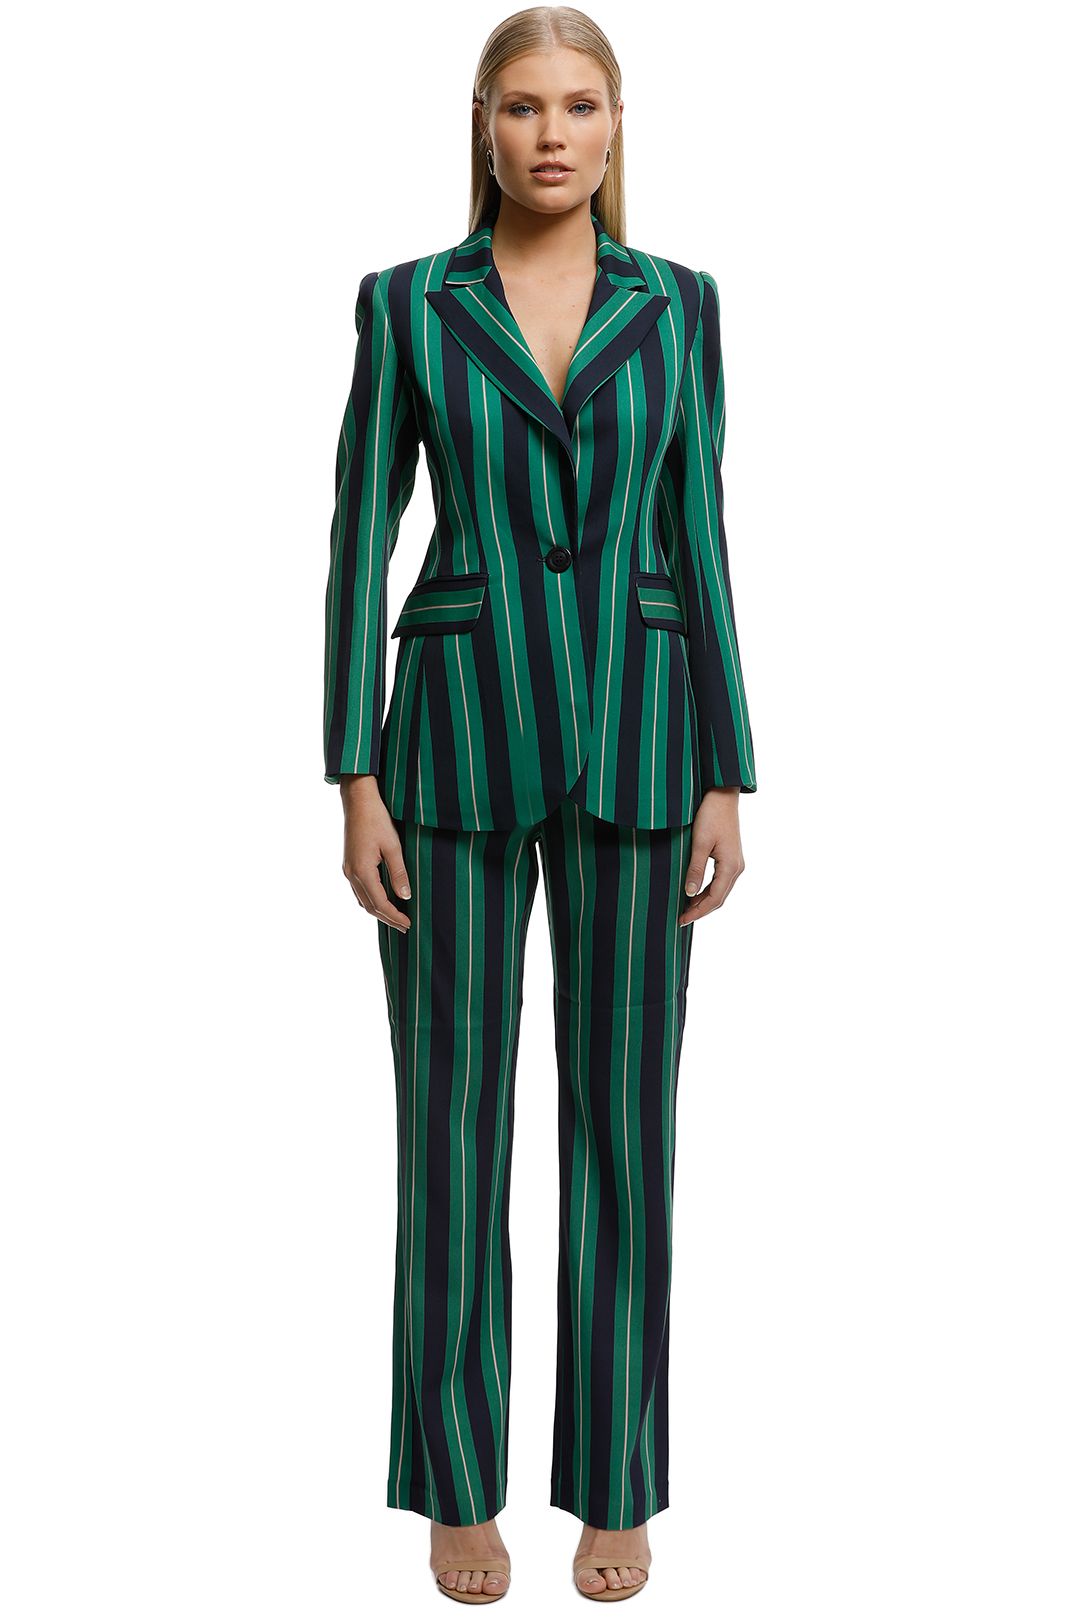 Moss-and-Spy-Gatsby-Blazer-and-Pant-Set-Green-Stripe-Front